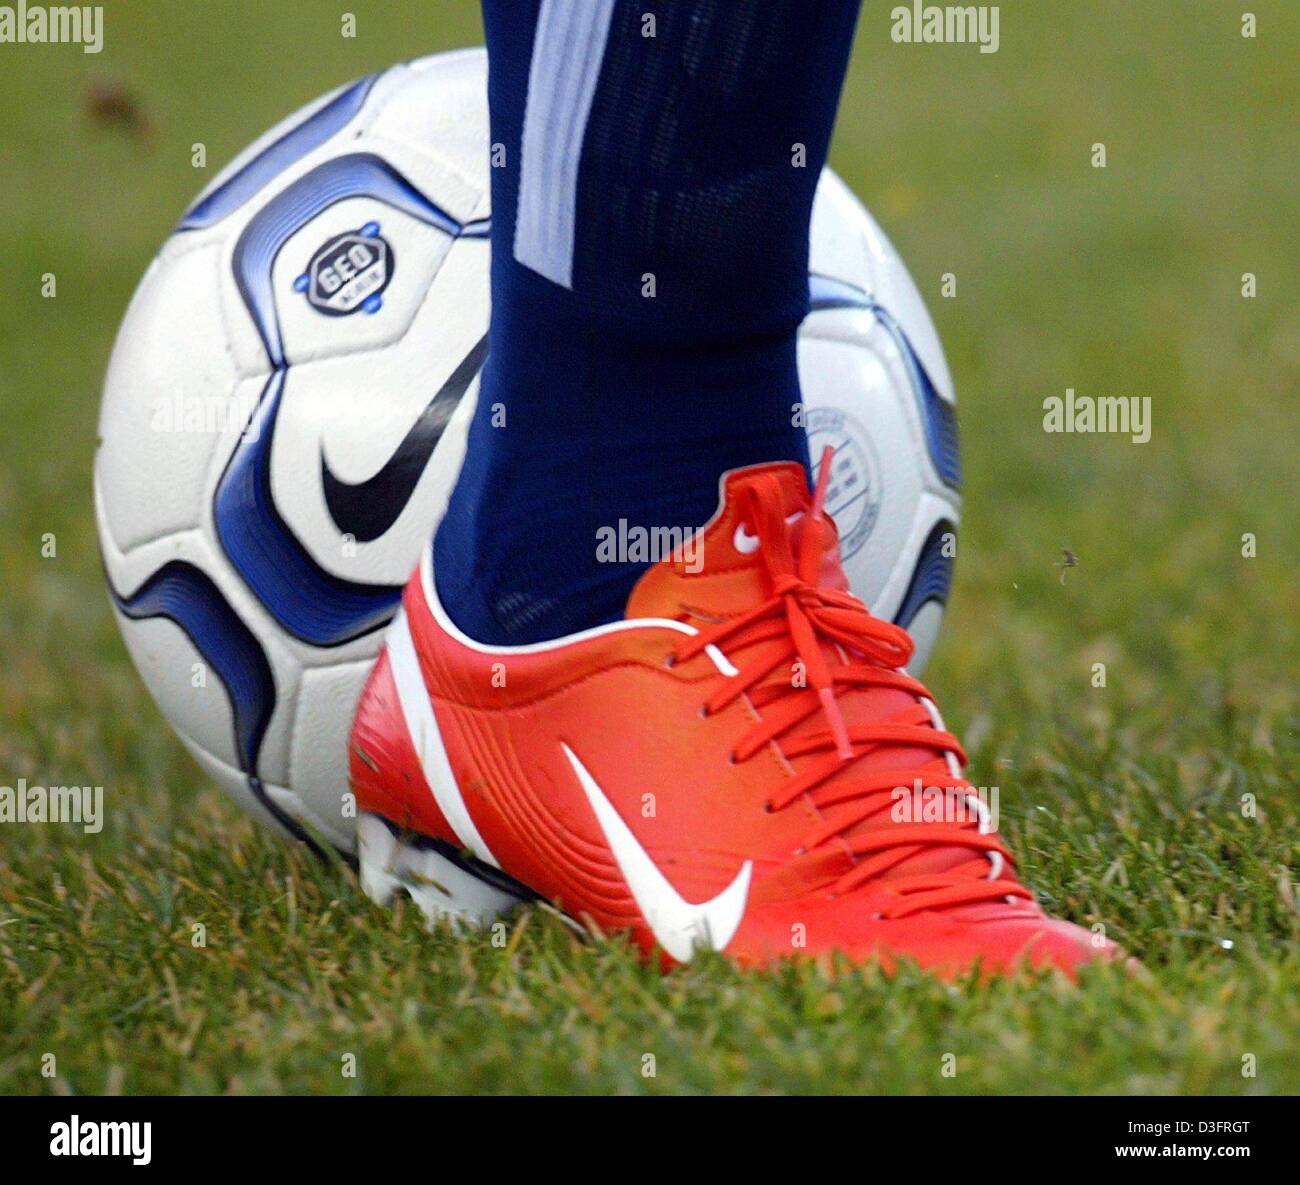 (dpa) - A bright orange Nike soccer shoe partially covers a Nike soccer ball on a soccer field in Berlin, Germany, 8 February 2003.  Marcelinho, a midfielder for Hertha BSC Berlin, recently began wearing the eye-catching shoe, which is new to the Nike line. Stock Photo